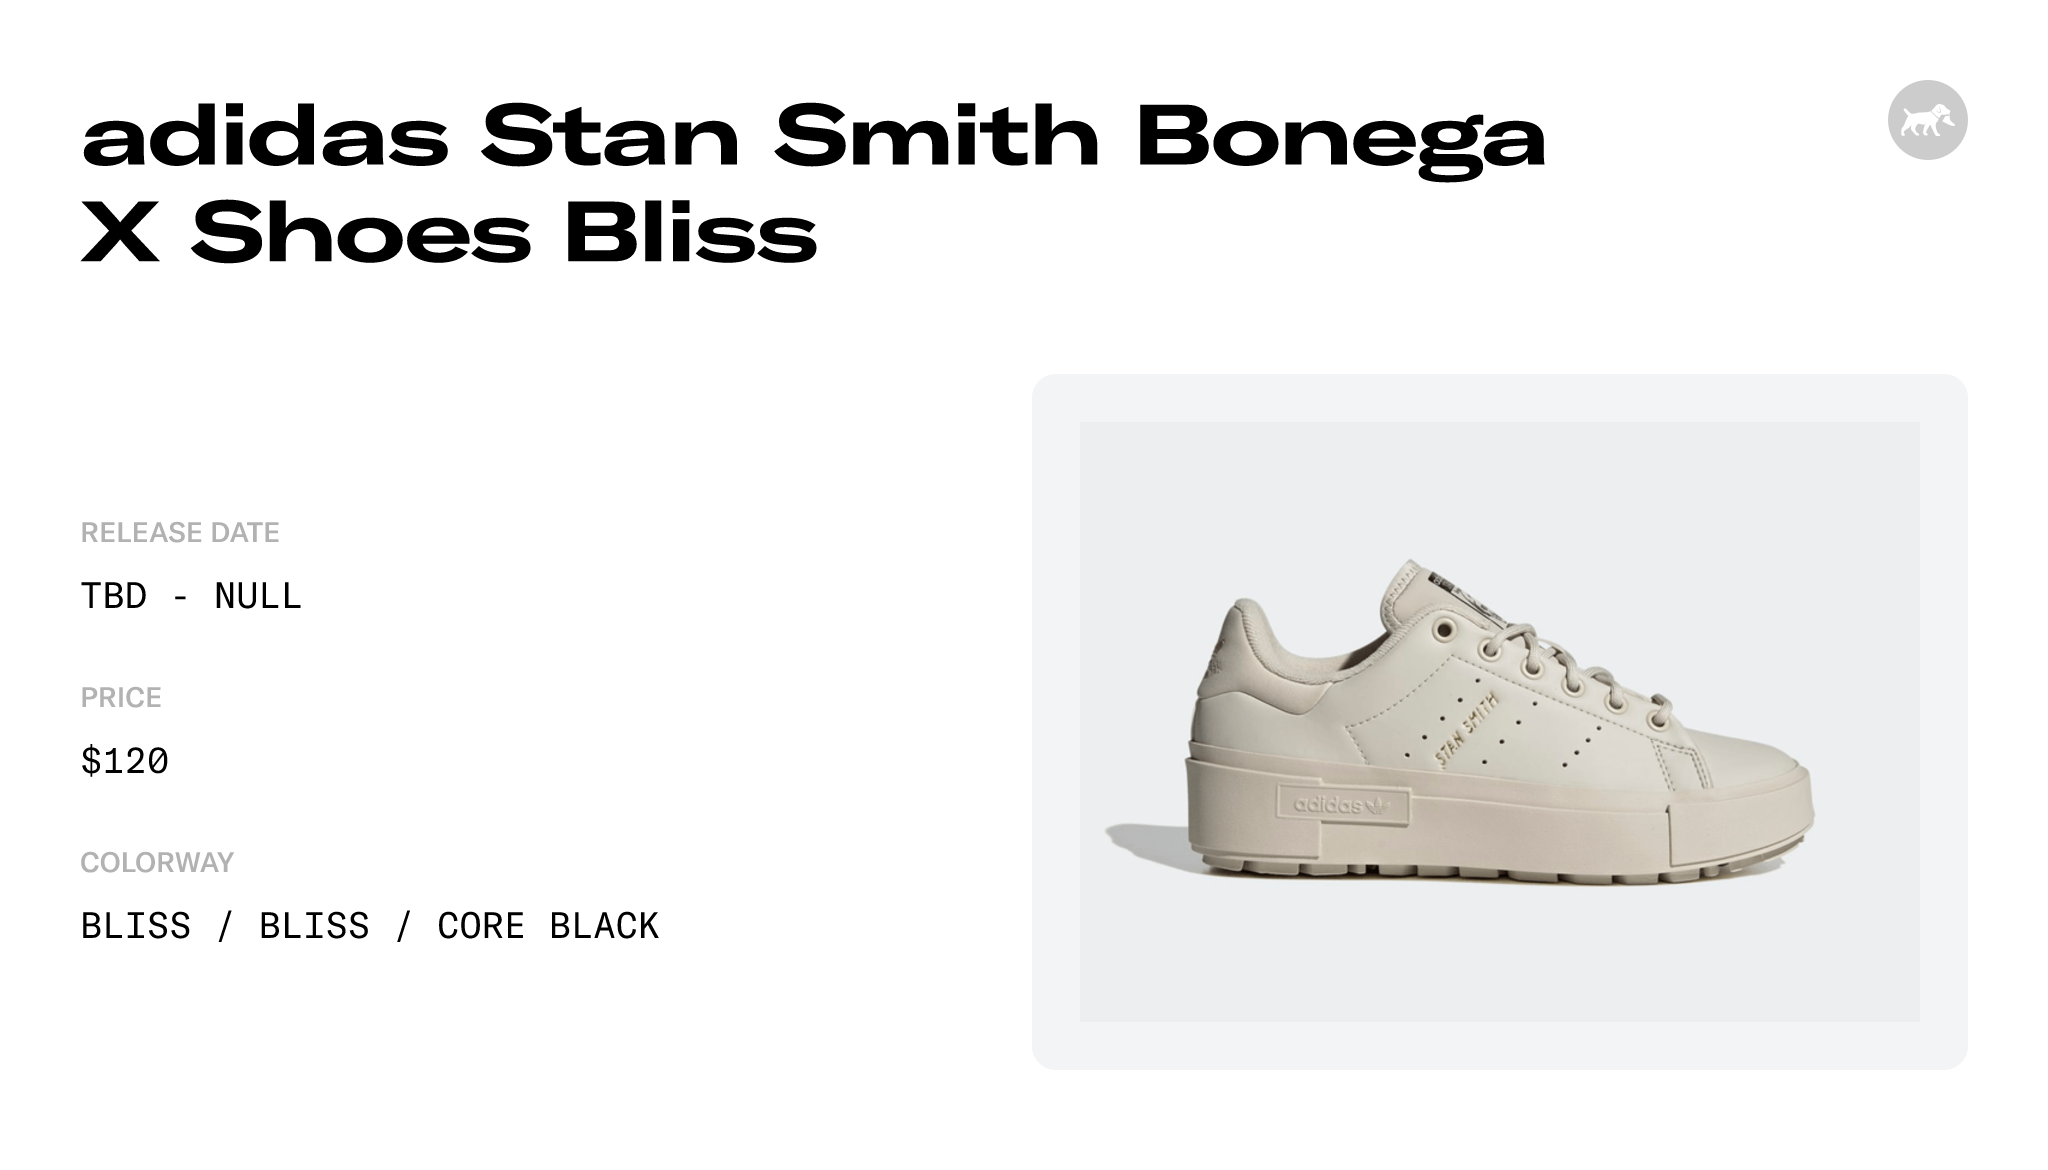 adidas Stan Smith Bonega Raffles Shoes and Bliss GY1499 - X Date Release